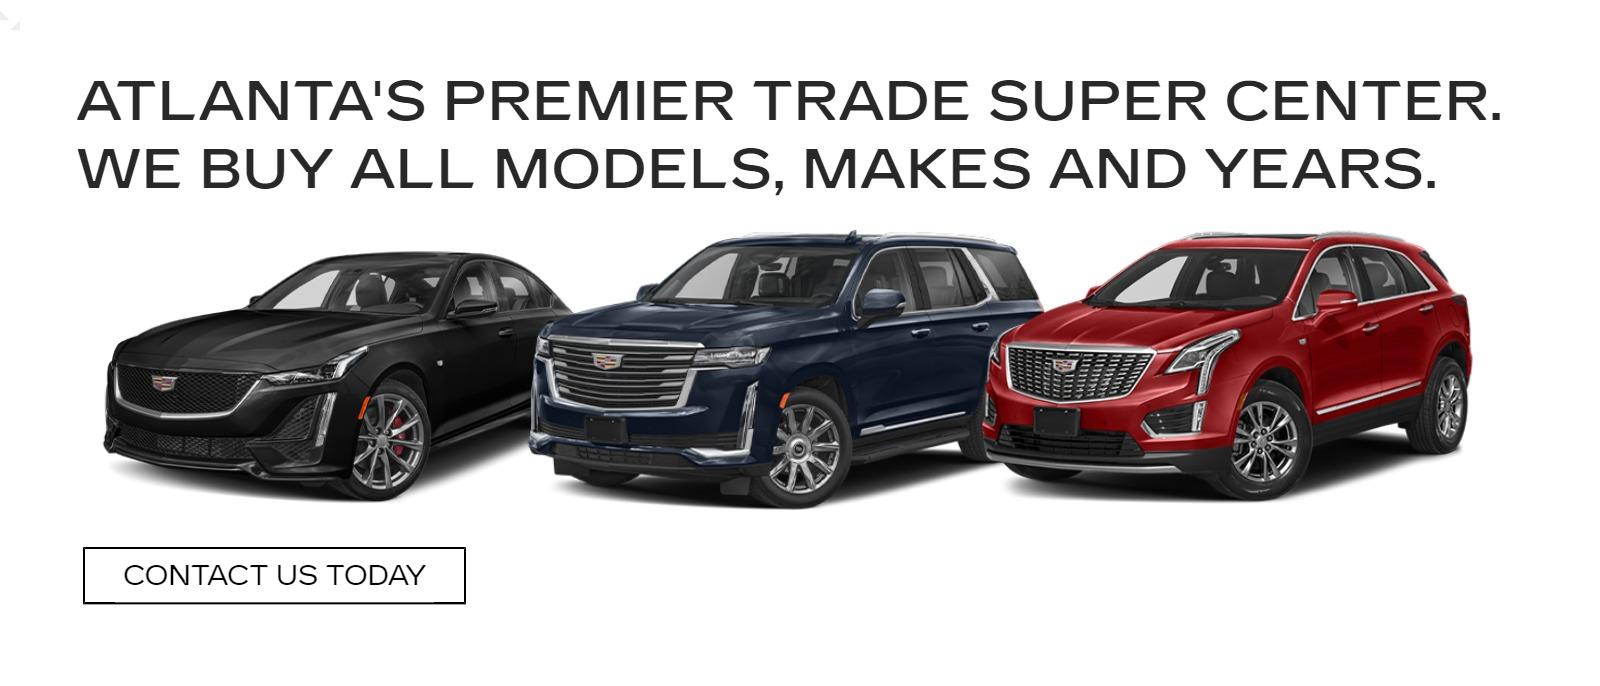 Atlanta's Premier Trade Super Center. We buy all models, makes and years.